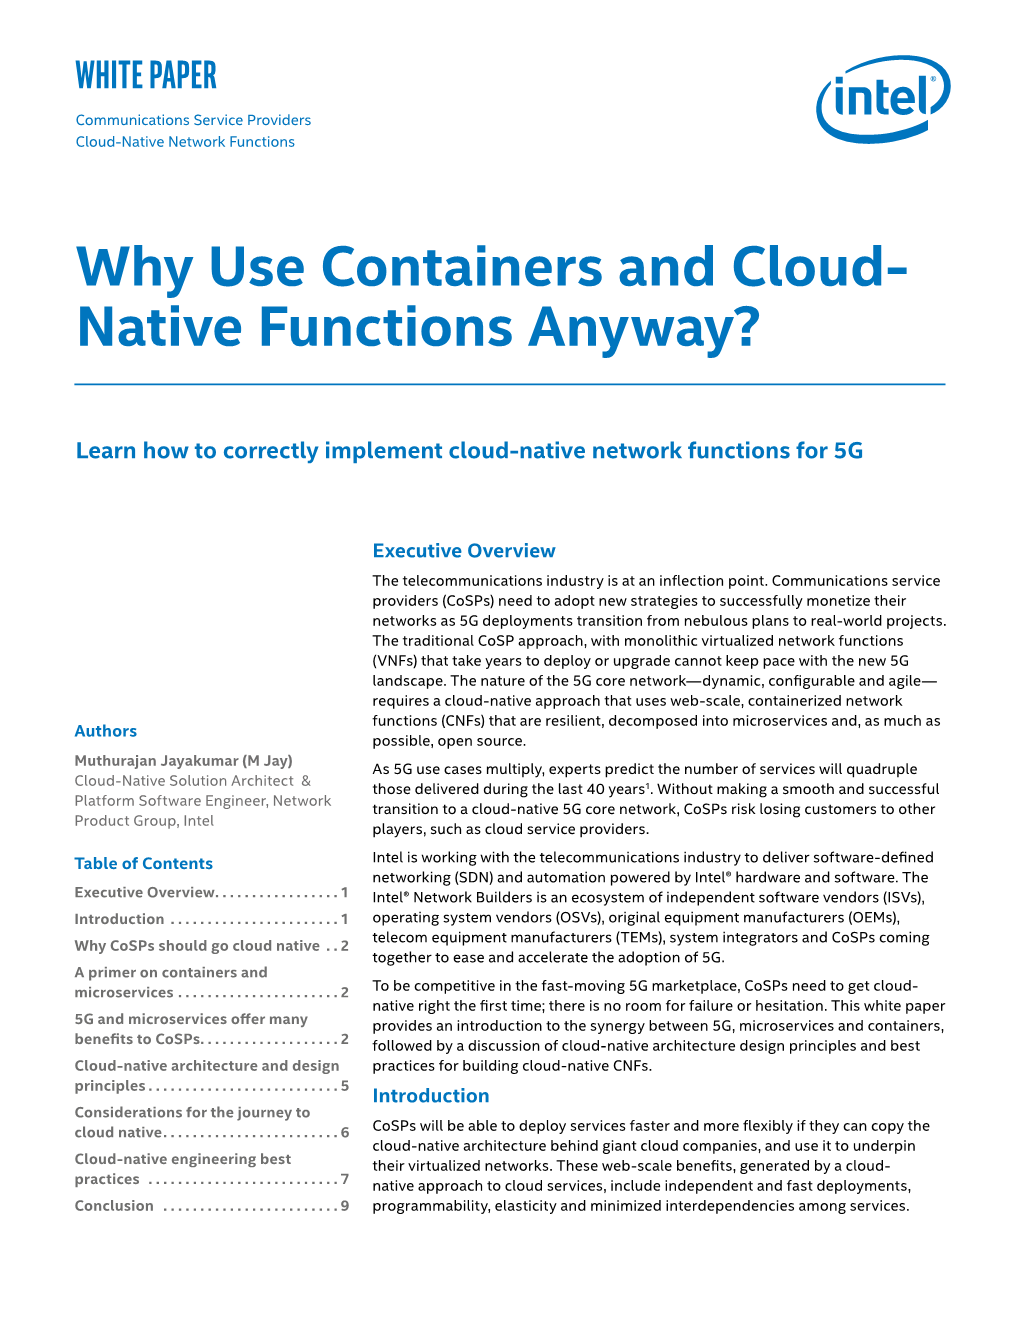 Why Use Containers and Cloud-Native Functions Anyway? 2